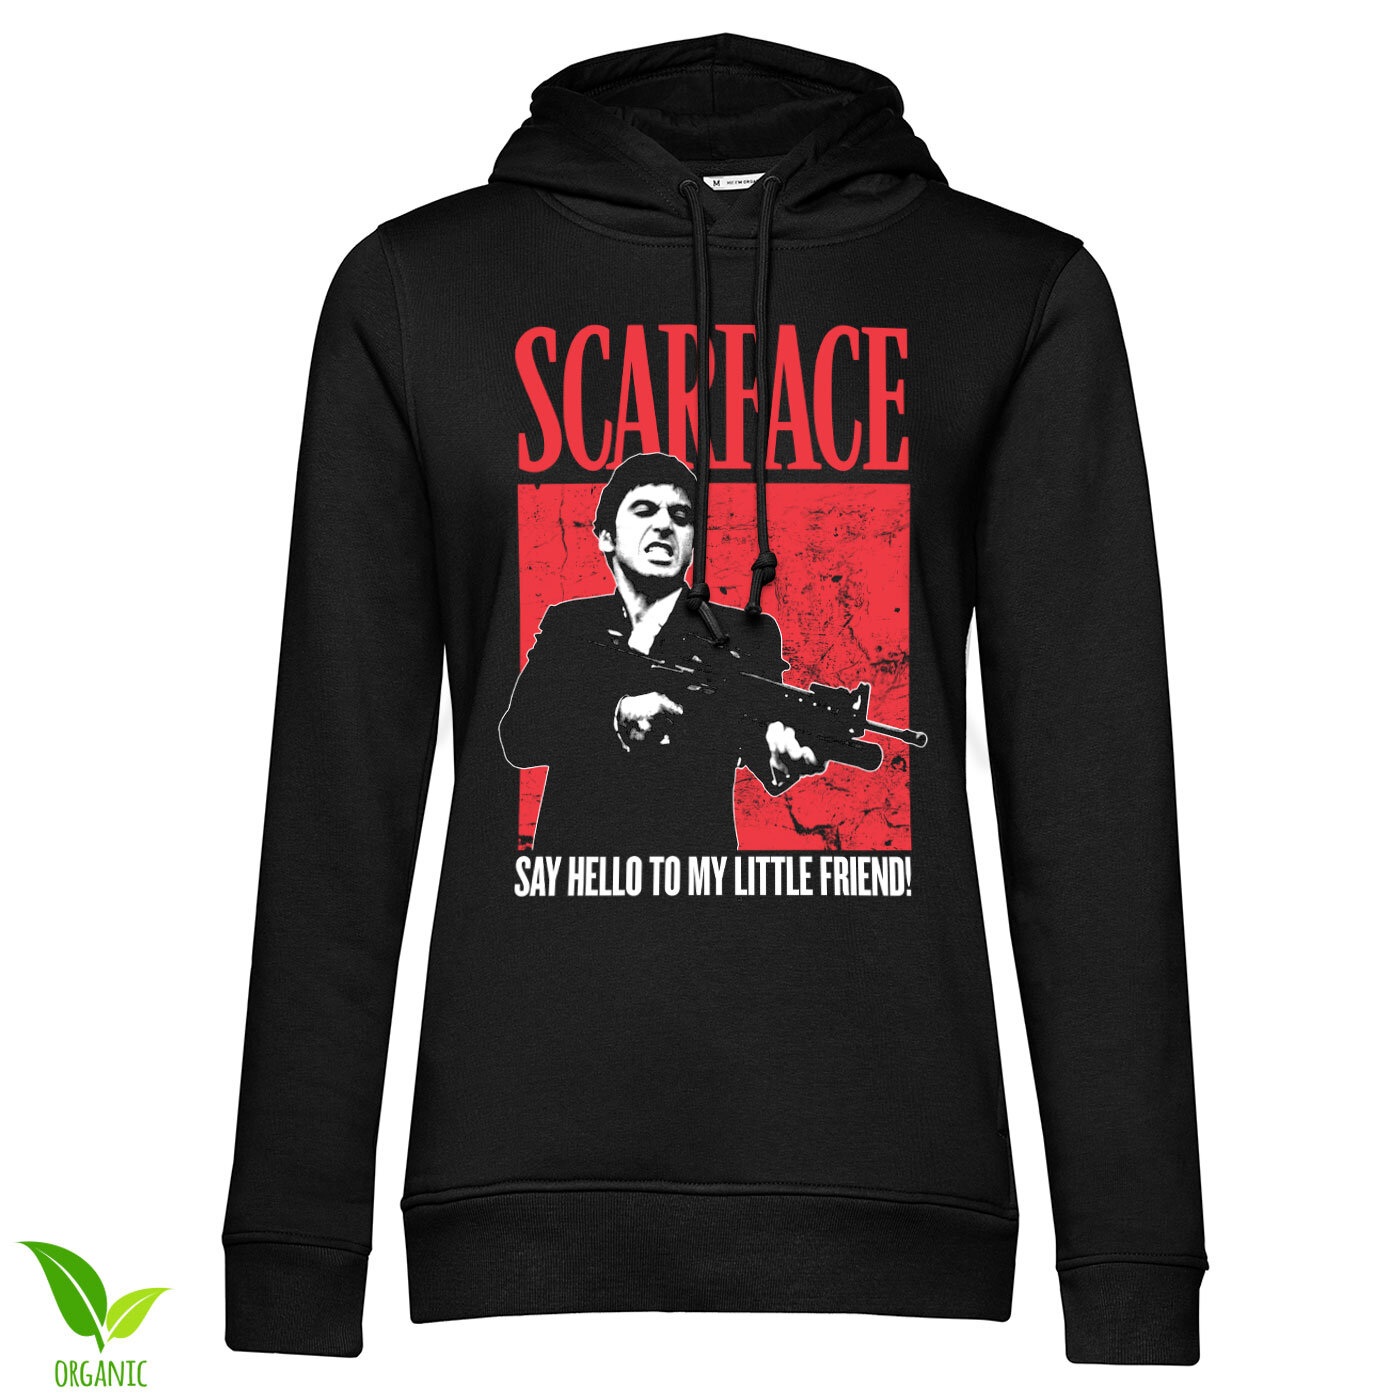 Say Hello To My Little Friend Girls Hoodie